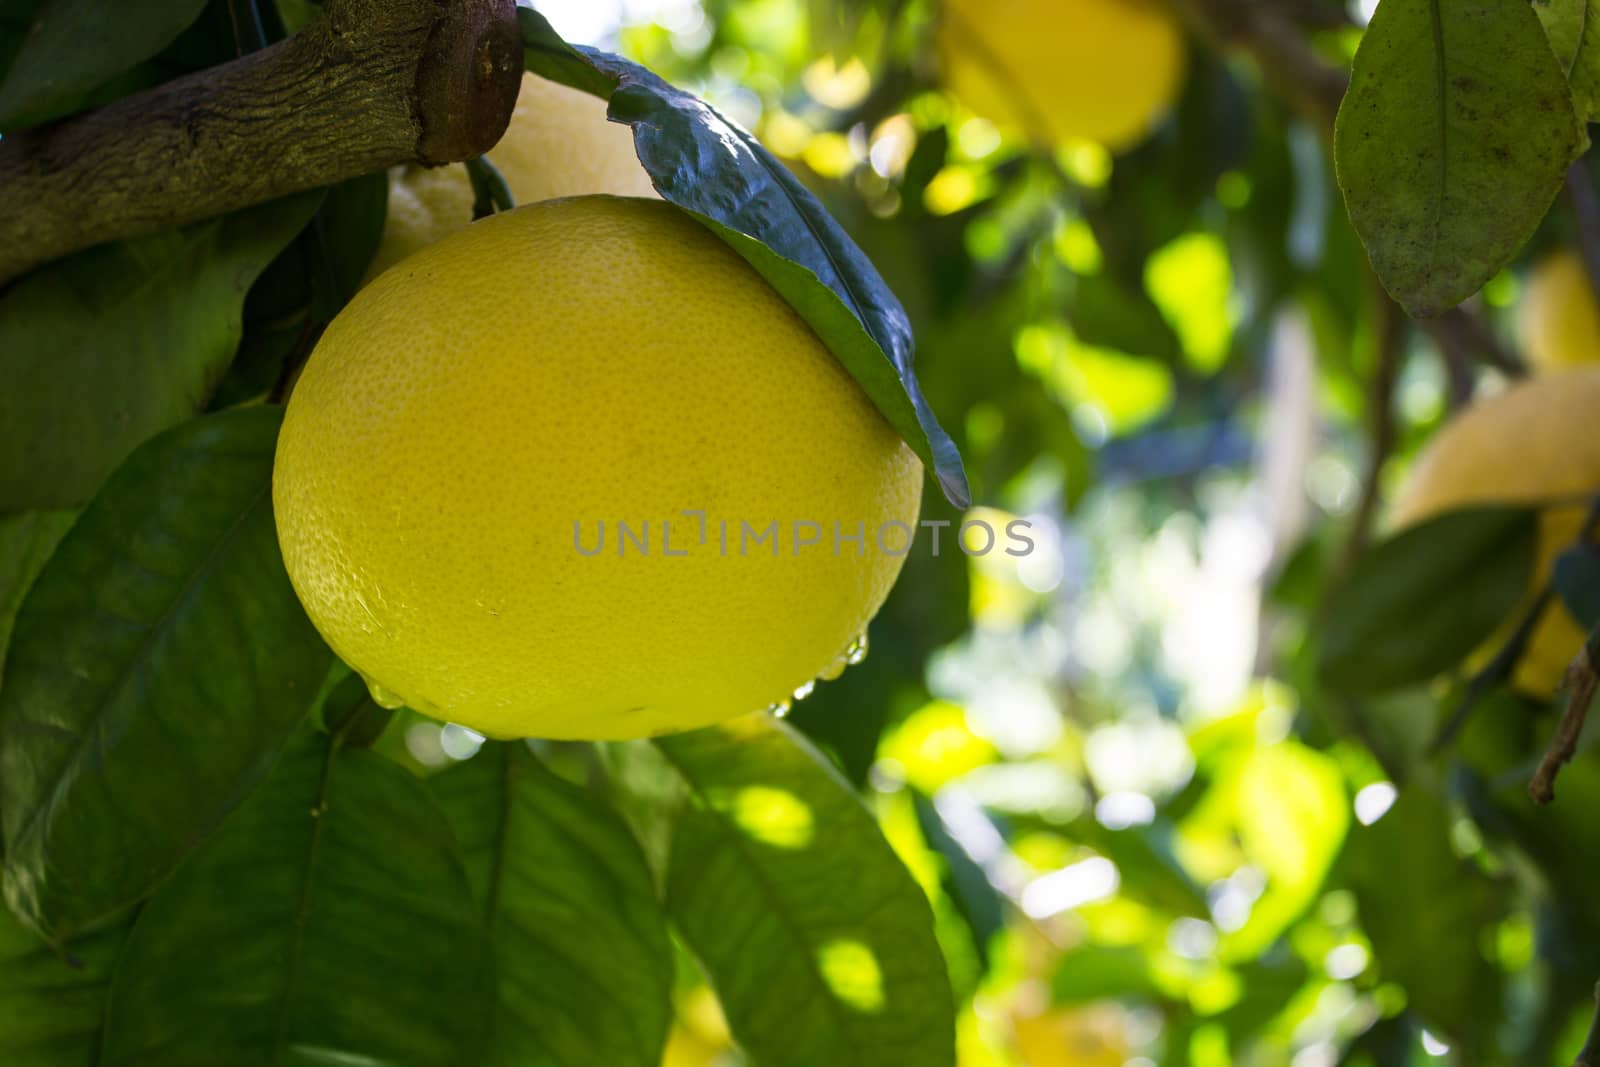 Grapefruit among the trees of an orchard